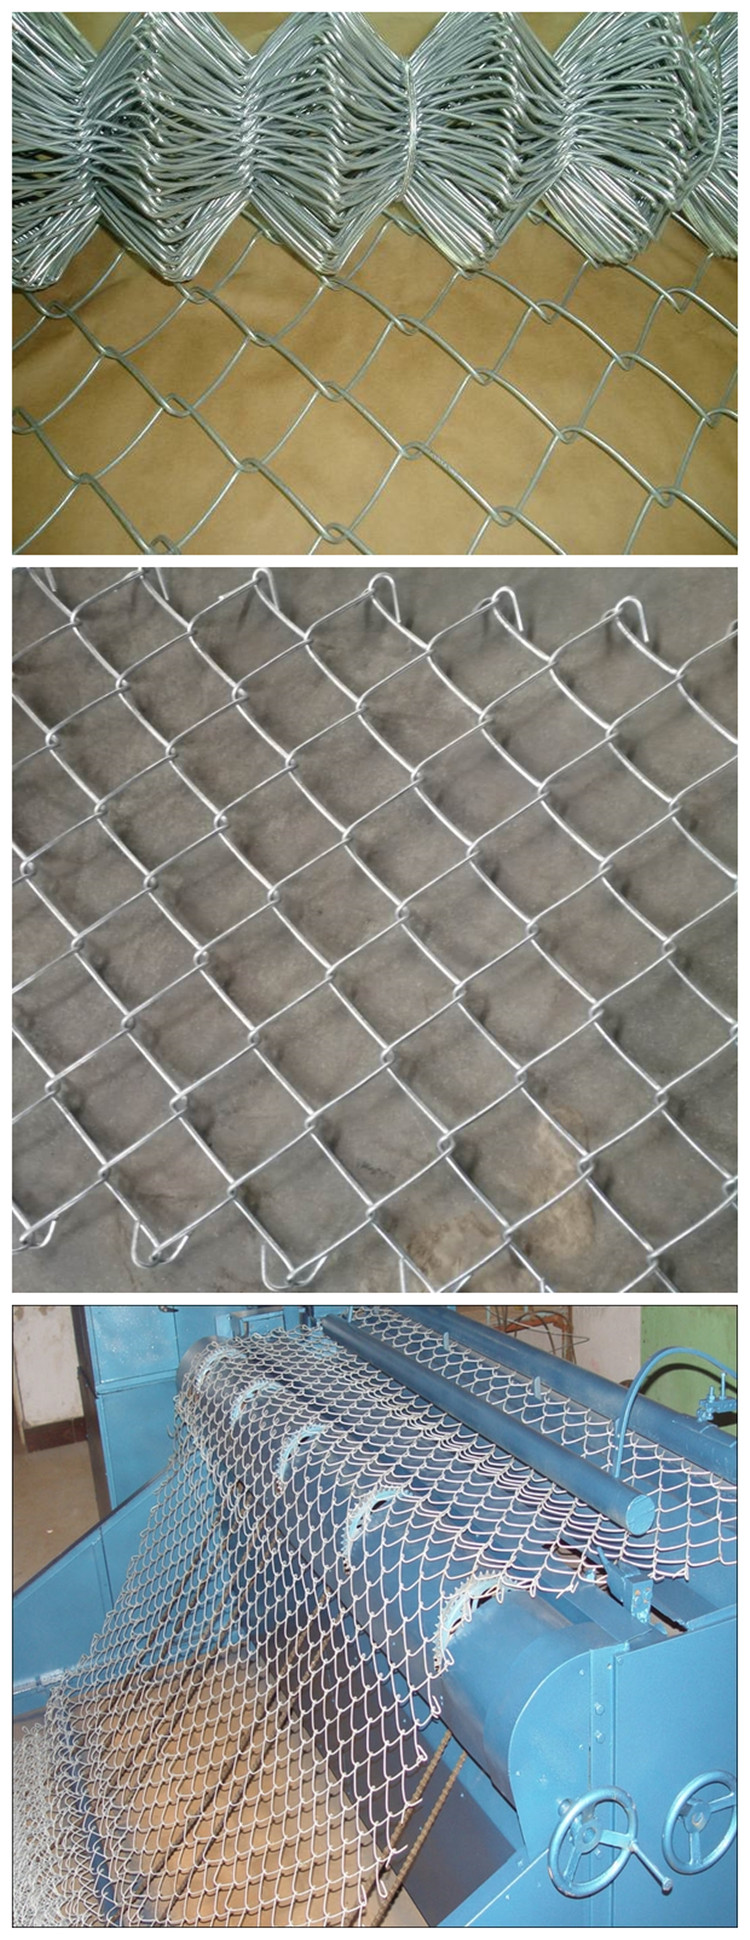 usd chain link fence 9 (7)